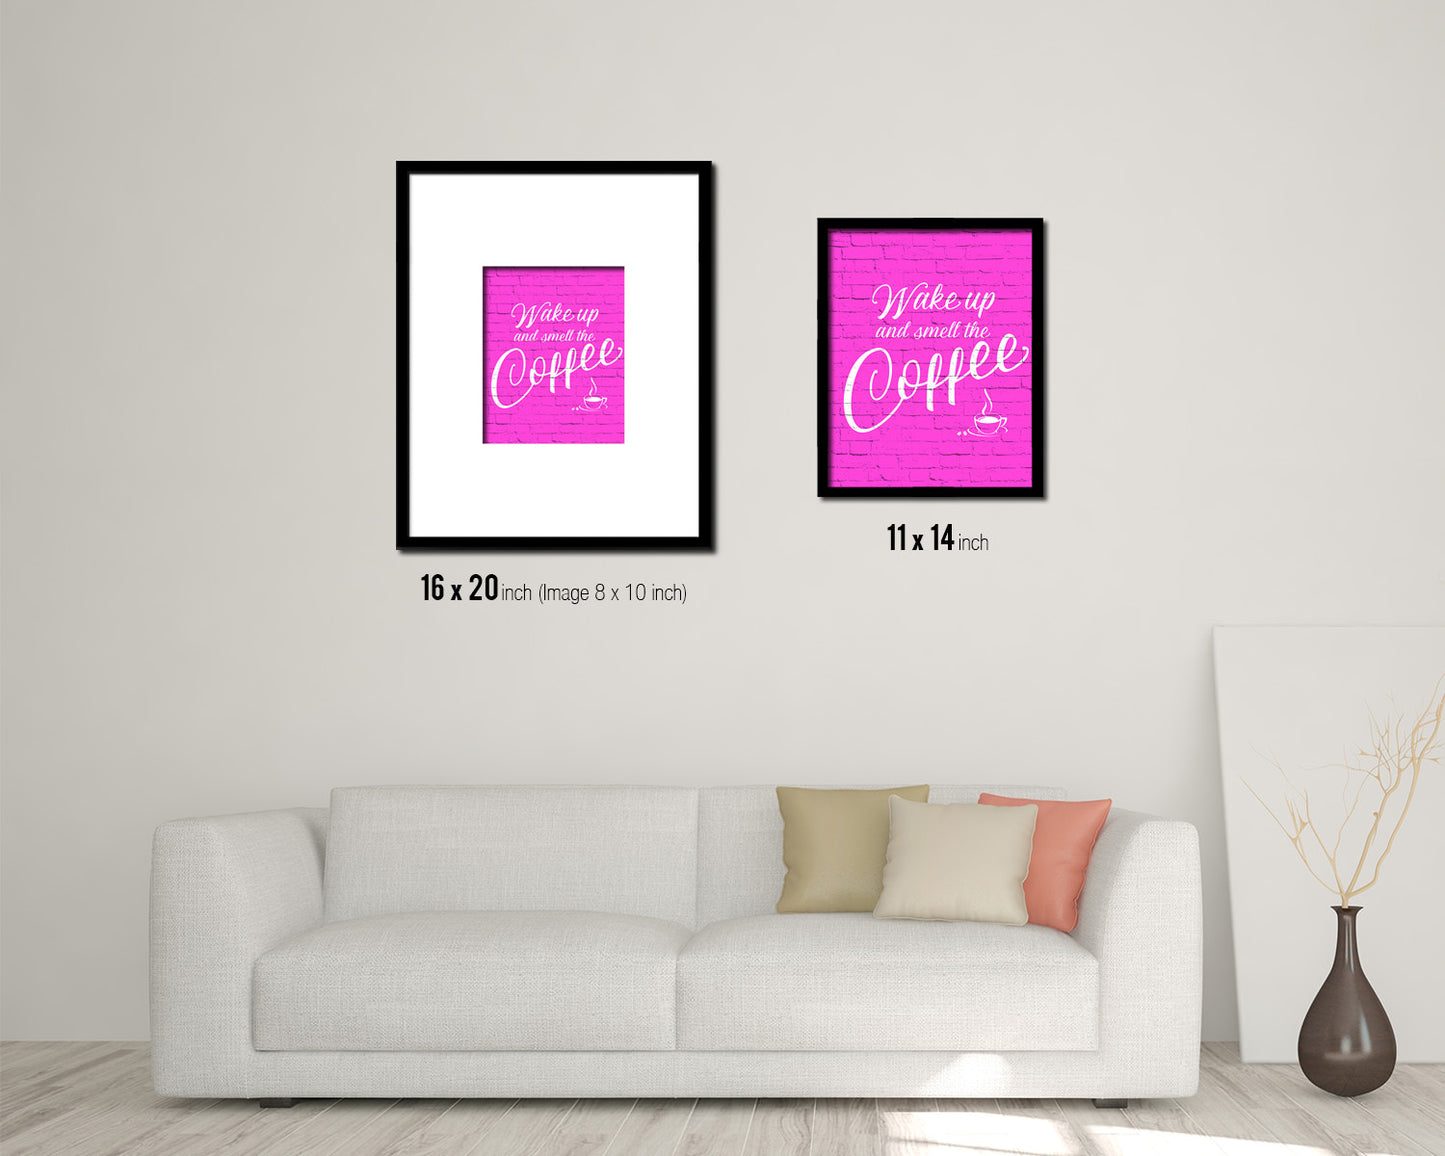 Wake up and smell the coffee Quotes Framed Print Home Decor Wall Art Gifts